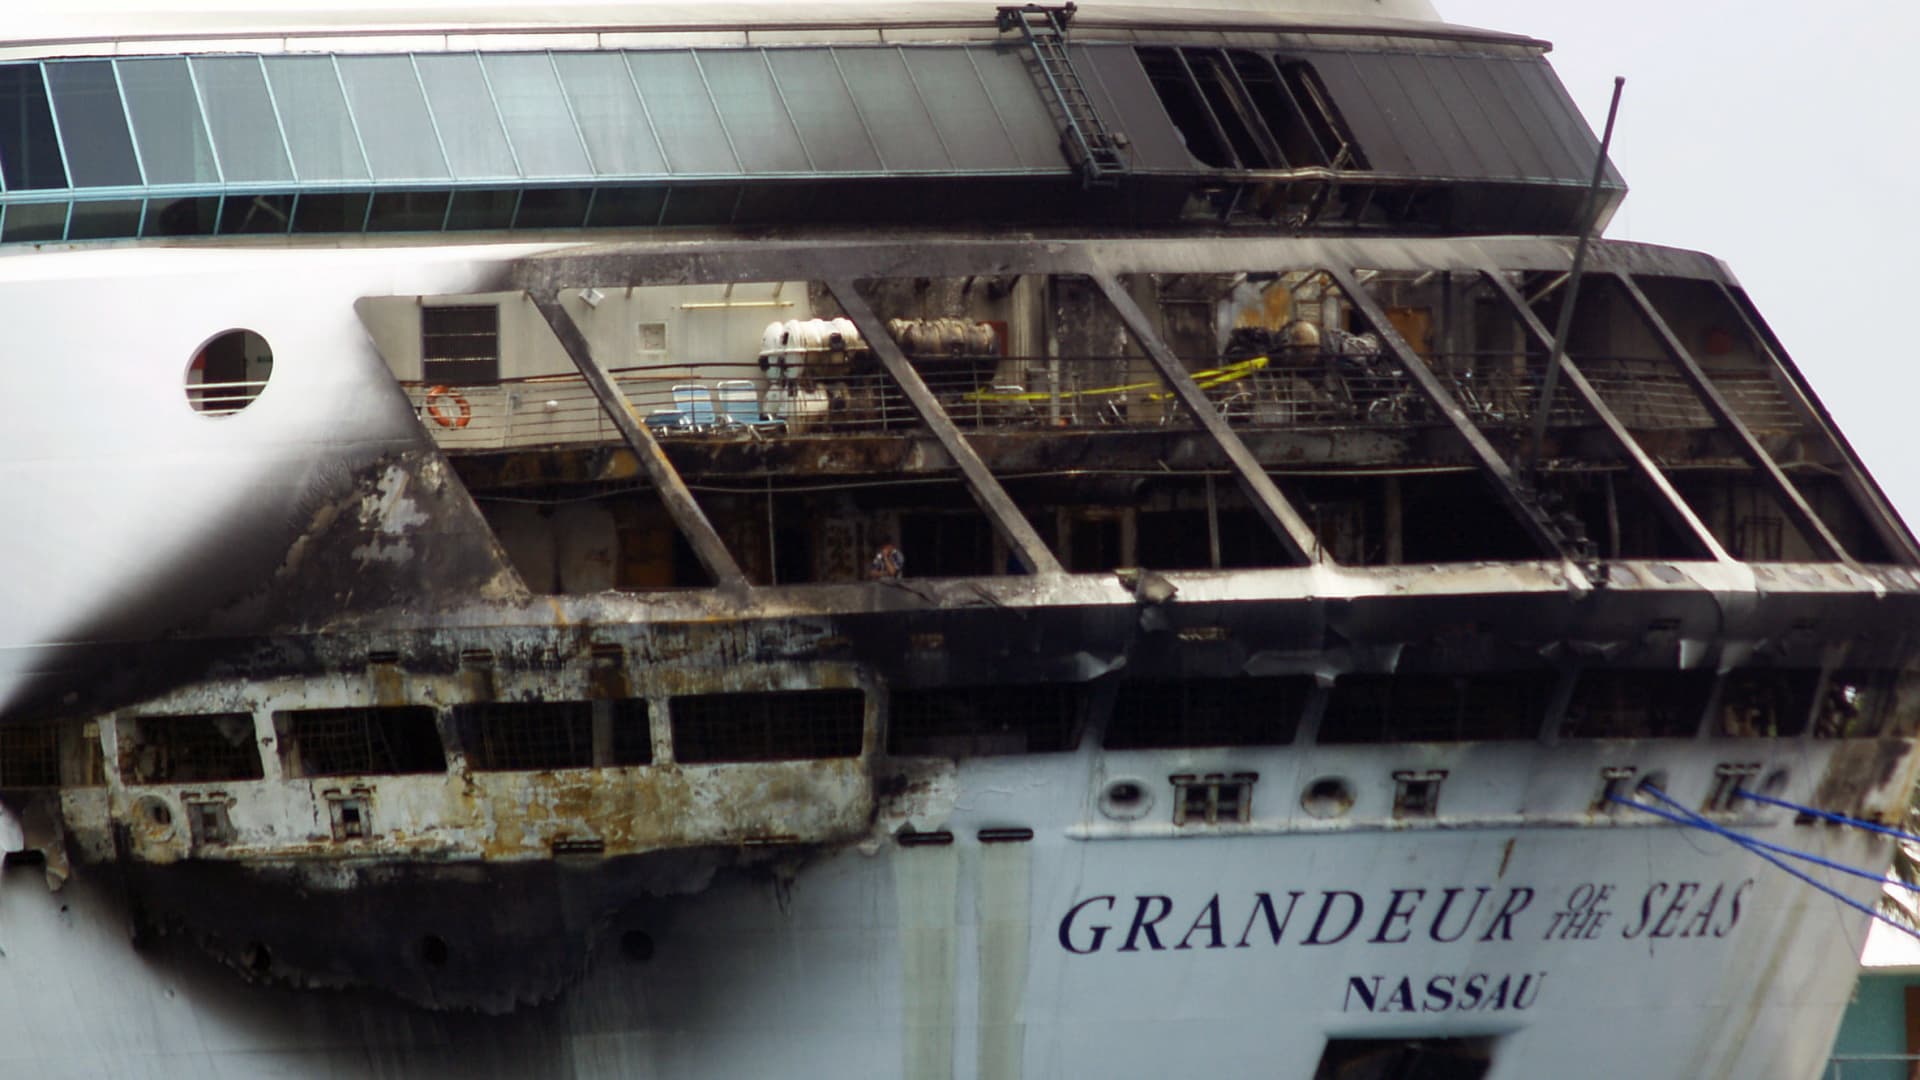 cruise ship fire new jersey